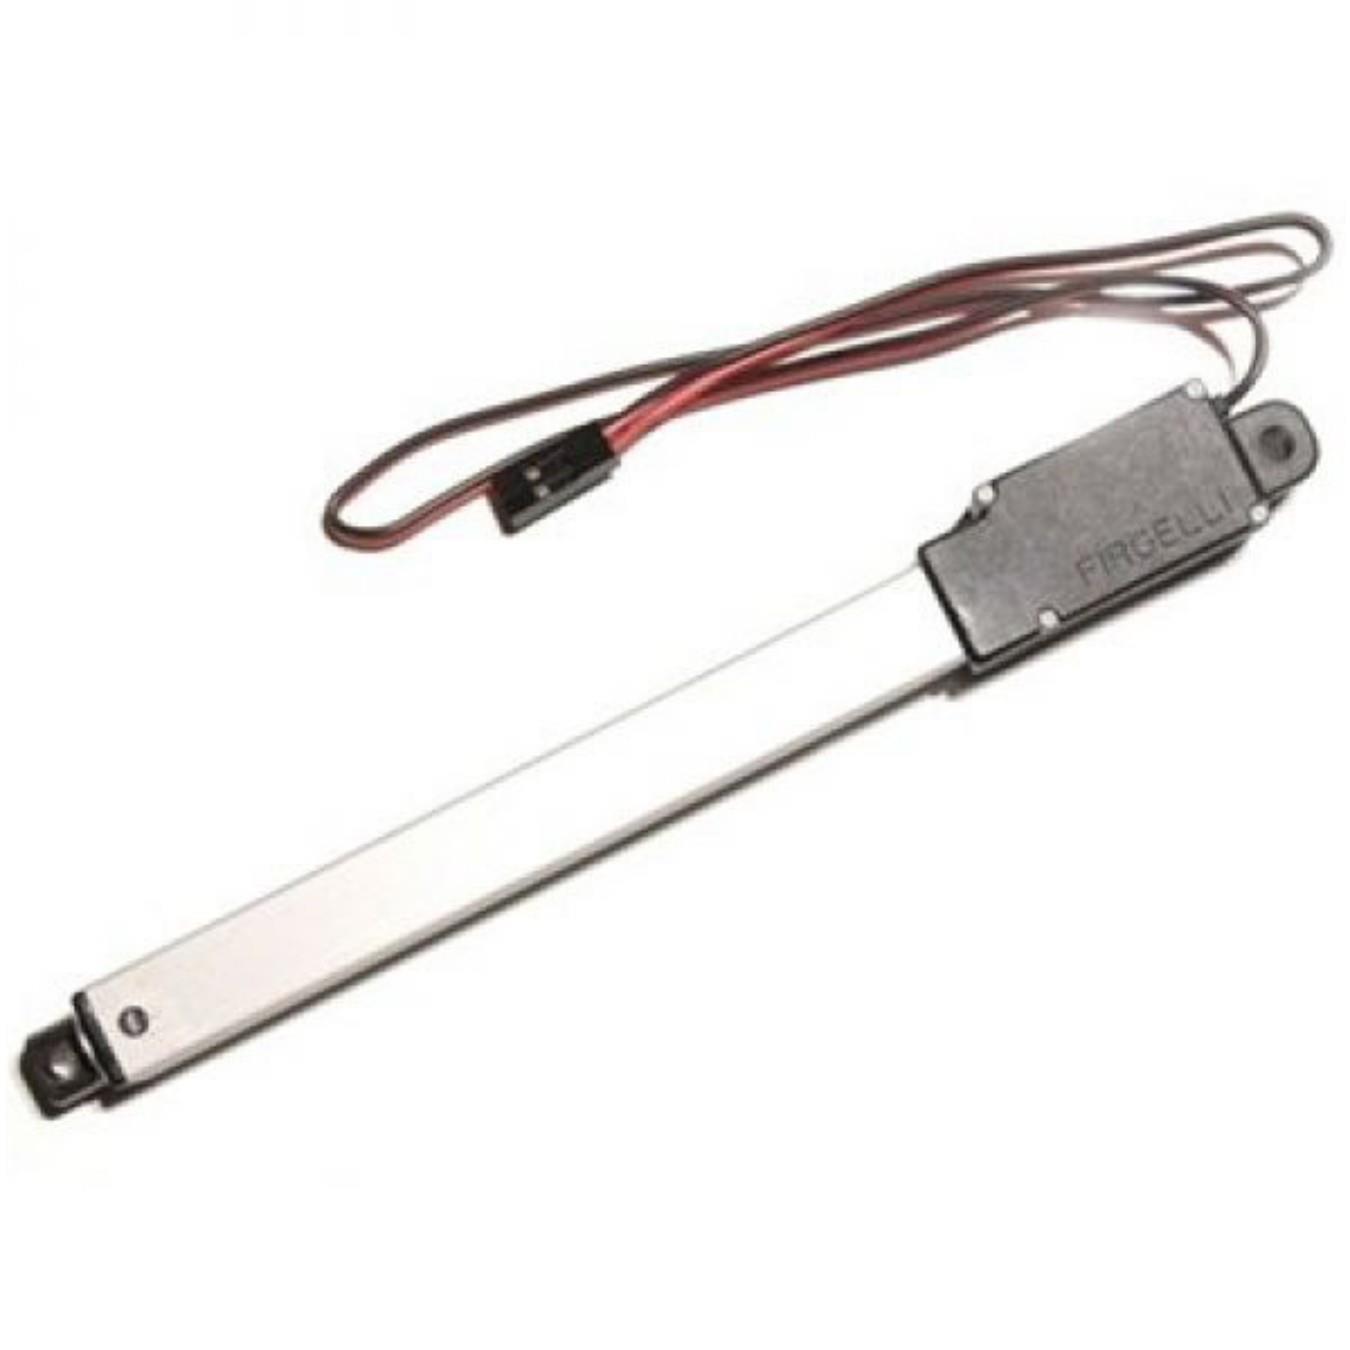 L12 Linear Actuator 100mm 210:1 12V Limit Switch